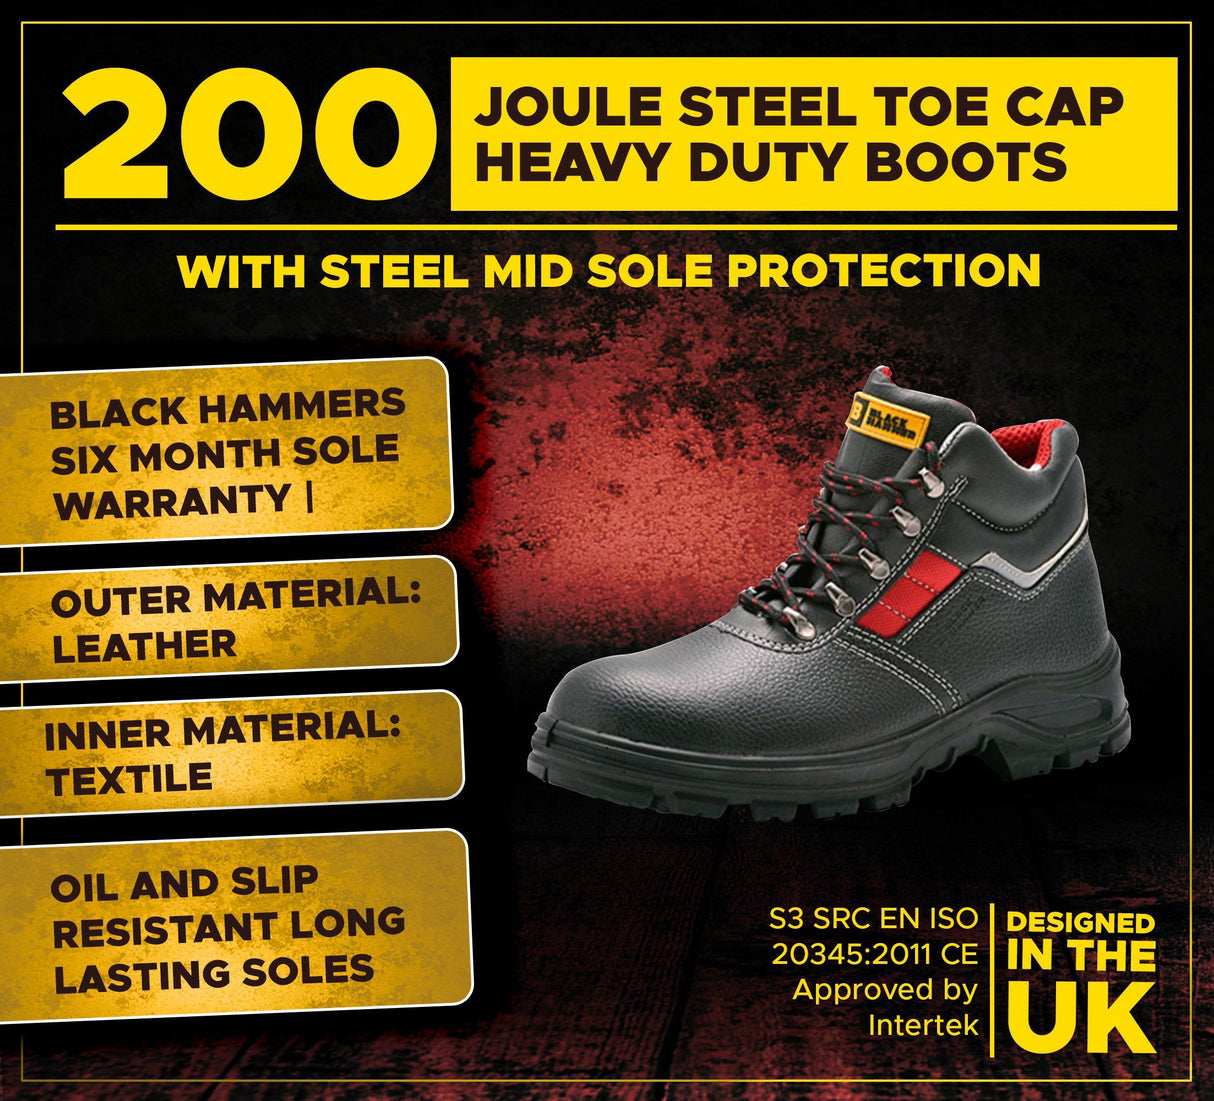 5993 Safety Work Boots for Men